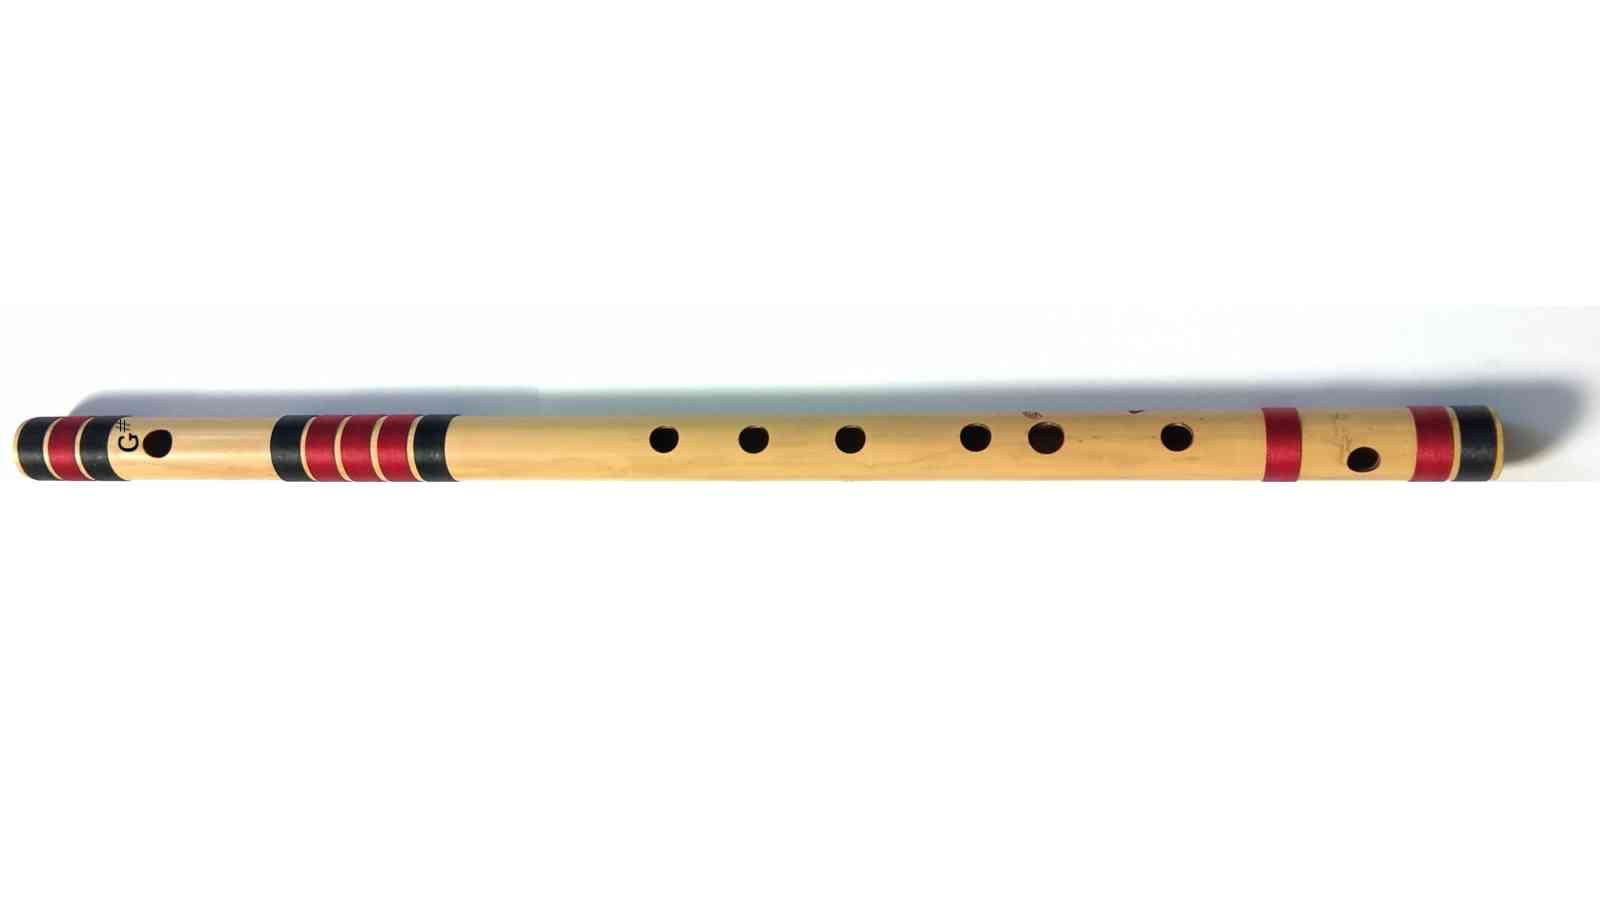 G# Base Indian Bamboo Flute (24.5 Inches)